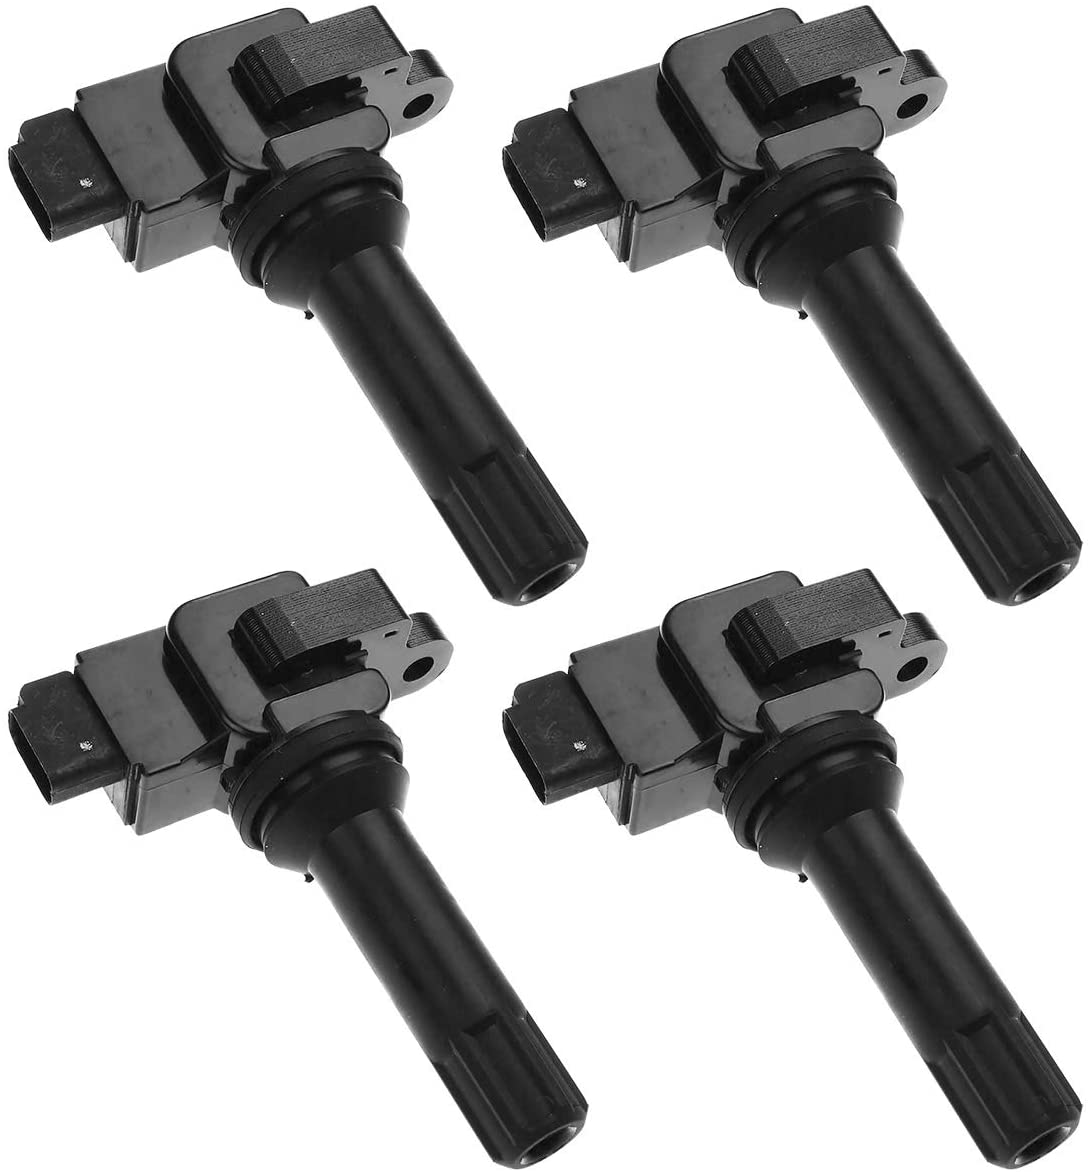 A-Premium Engine Ignition Coil Pack Compatible with Subaru Forester 2011-2012 Impereza 2012 H4 2.5L 4-PC Set